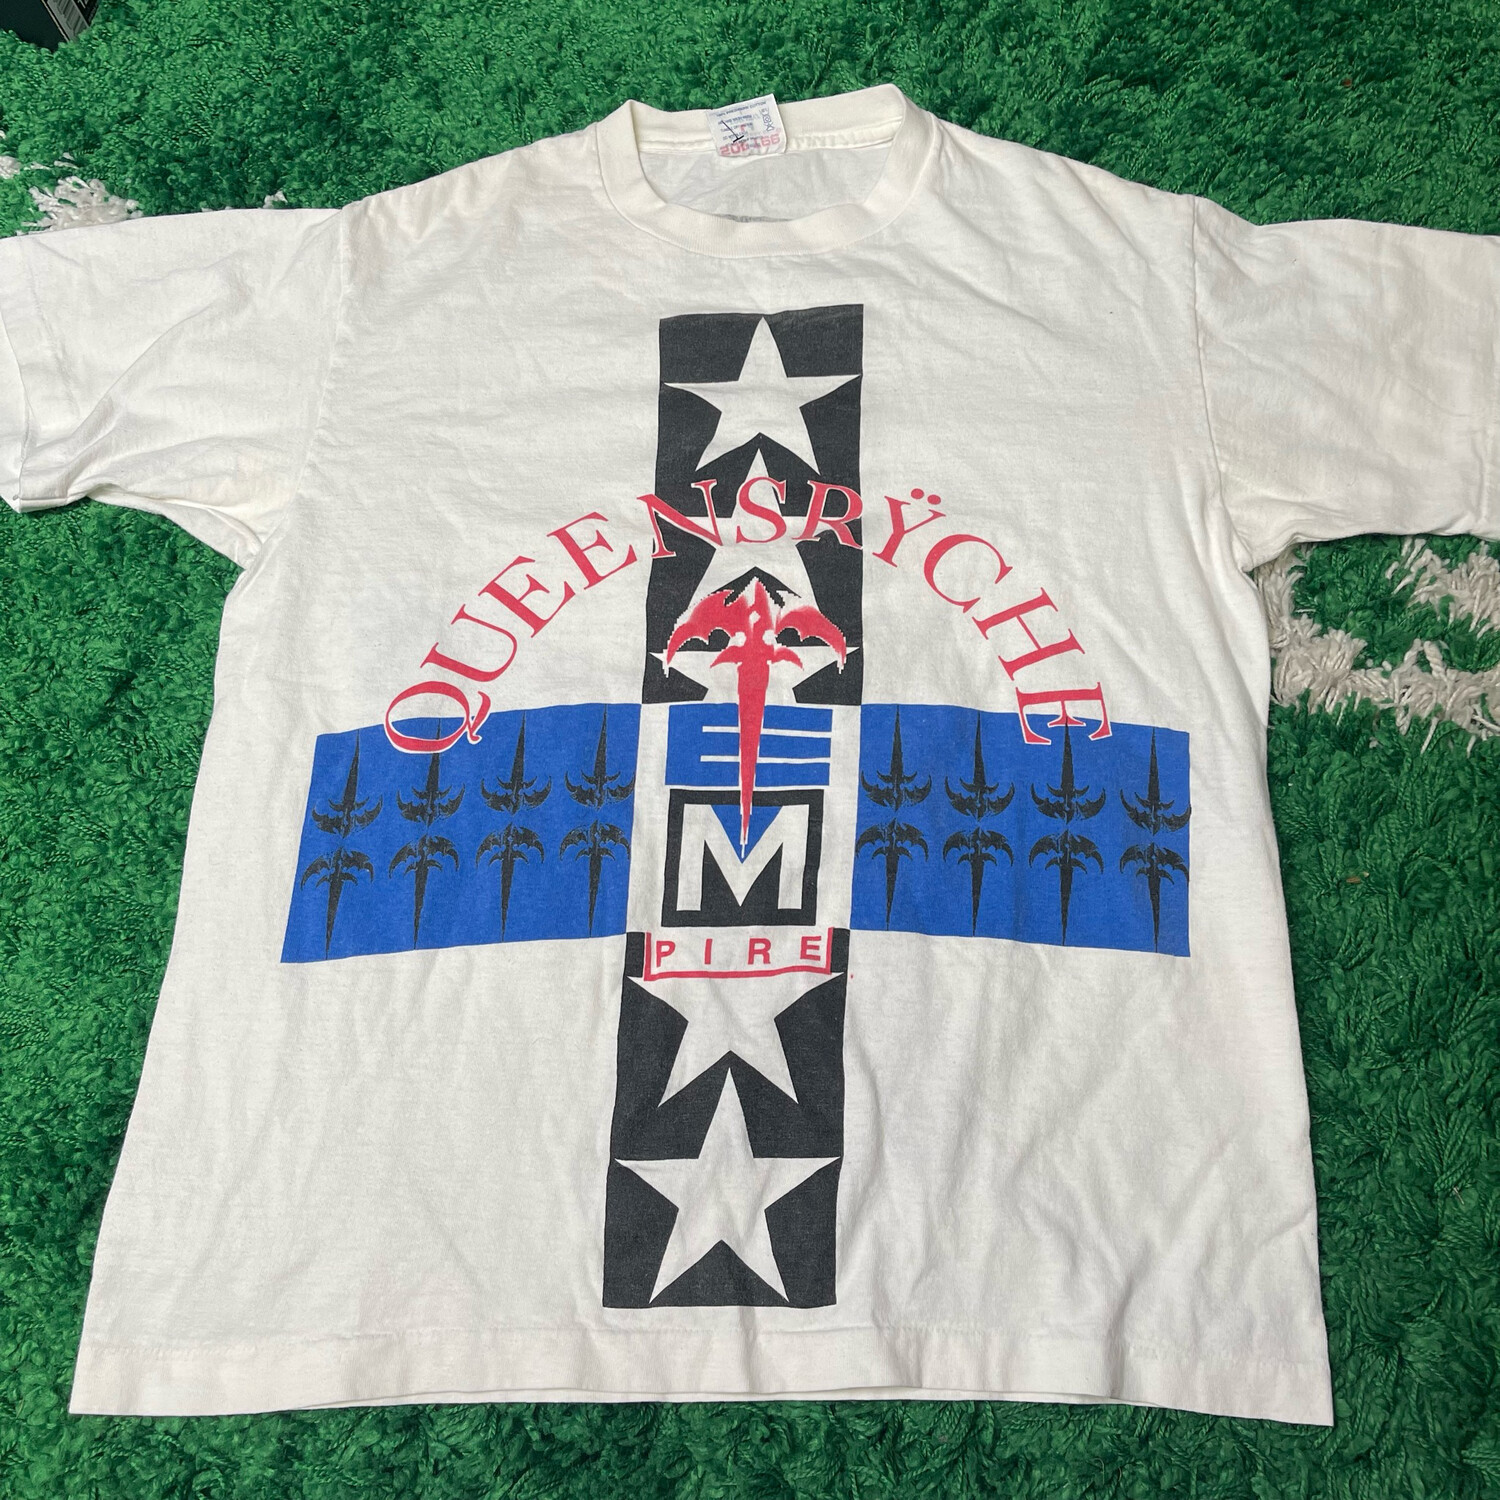 Queensrych Empire Tee Size Large